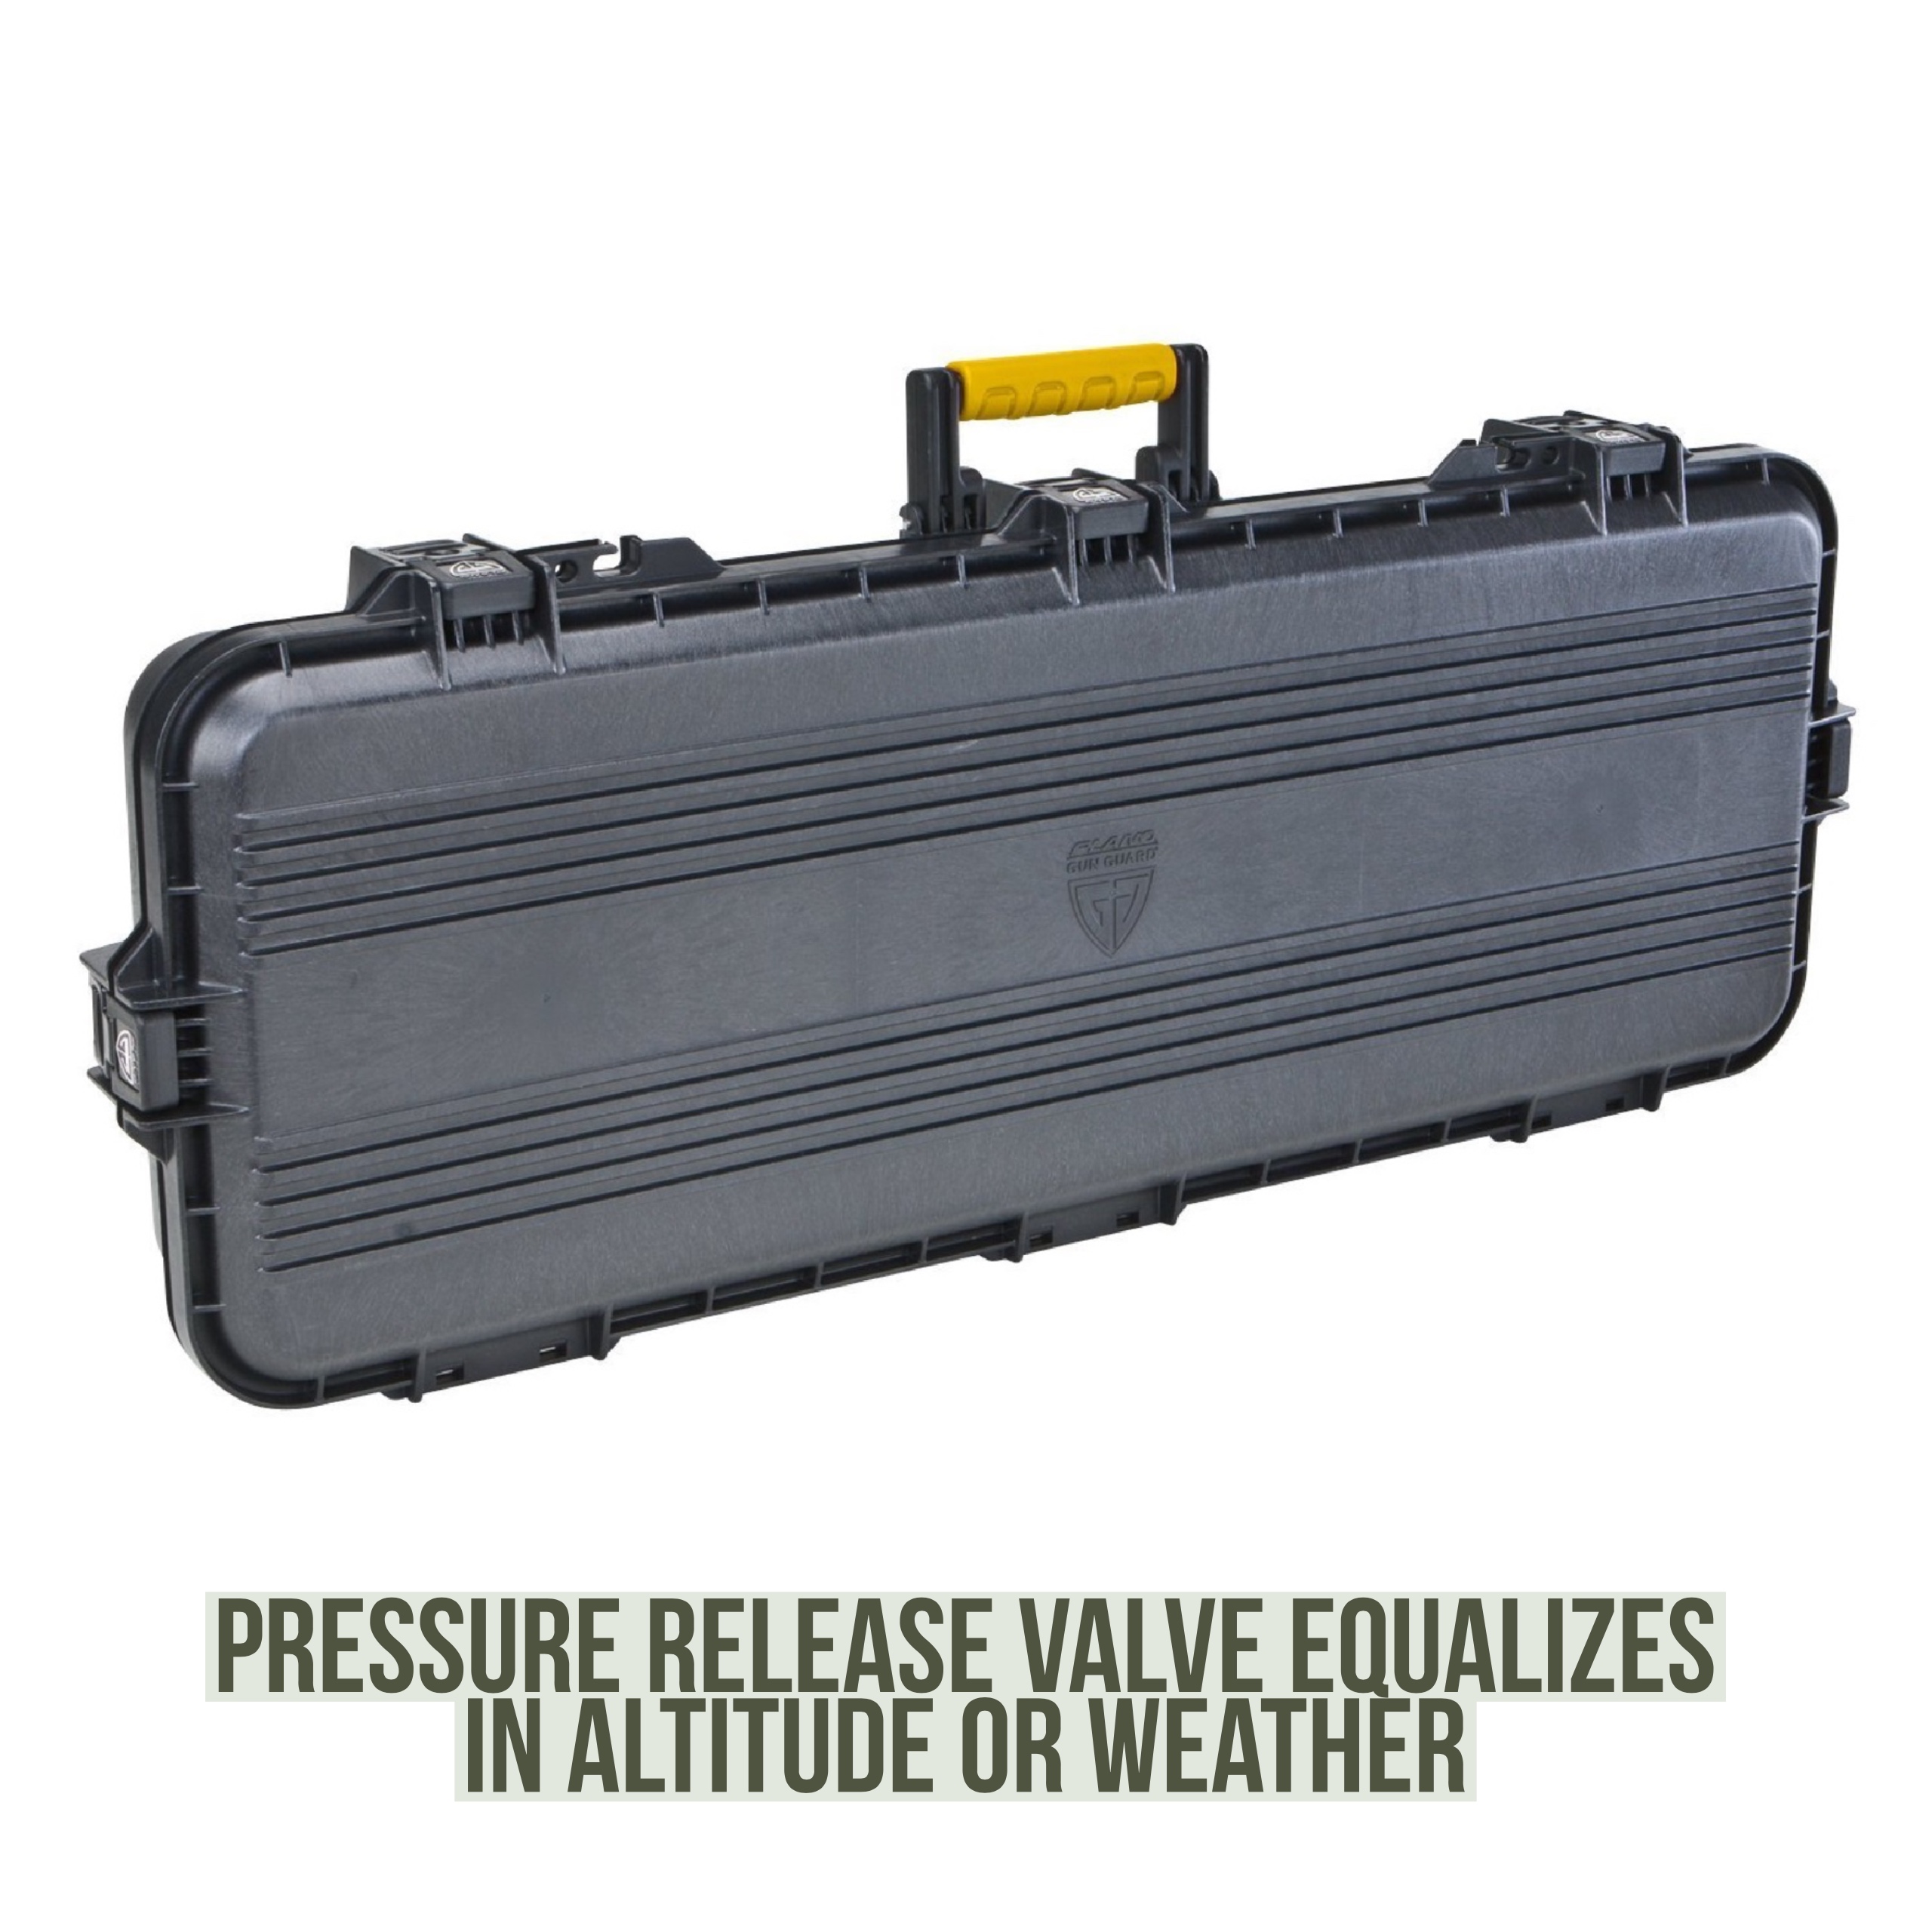 Plano All Weather Single Rifle Case, Black - image 2 of 9